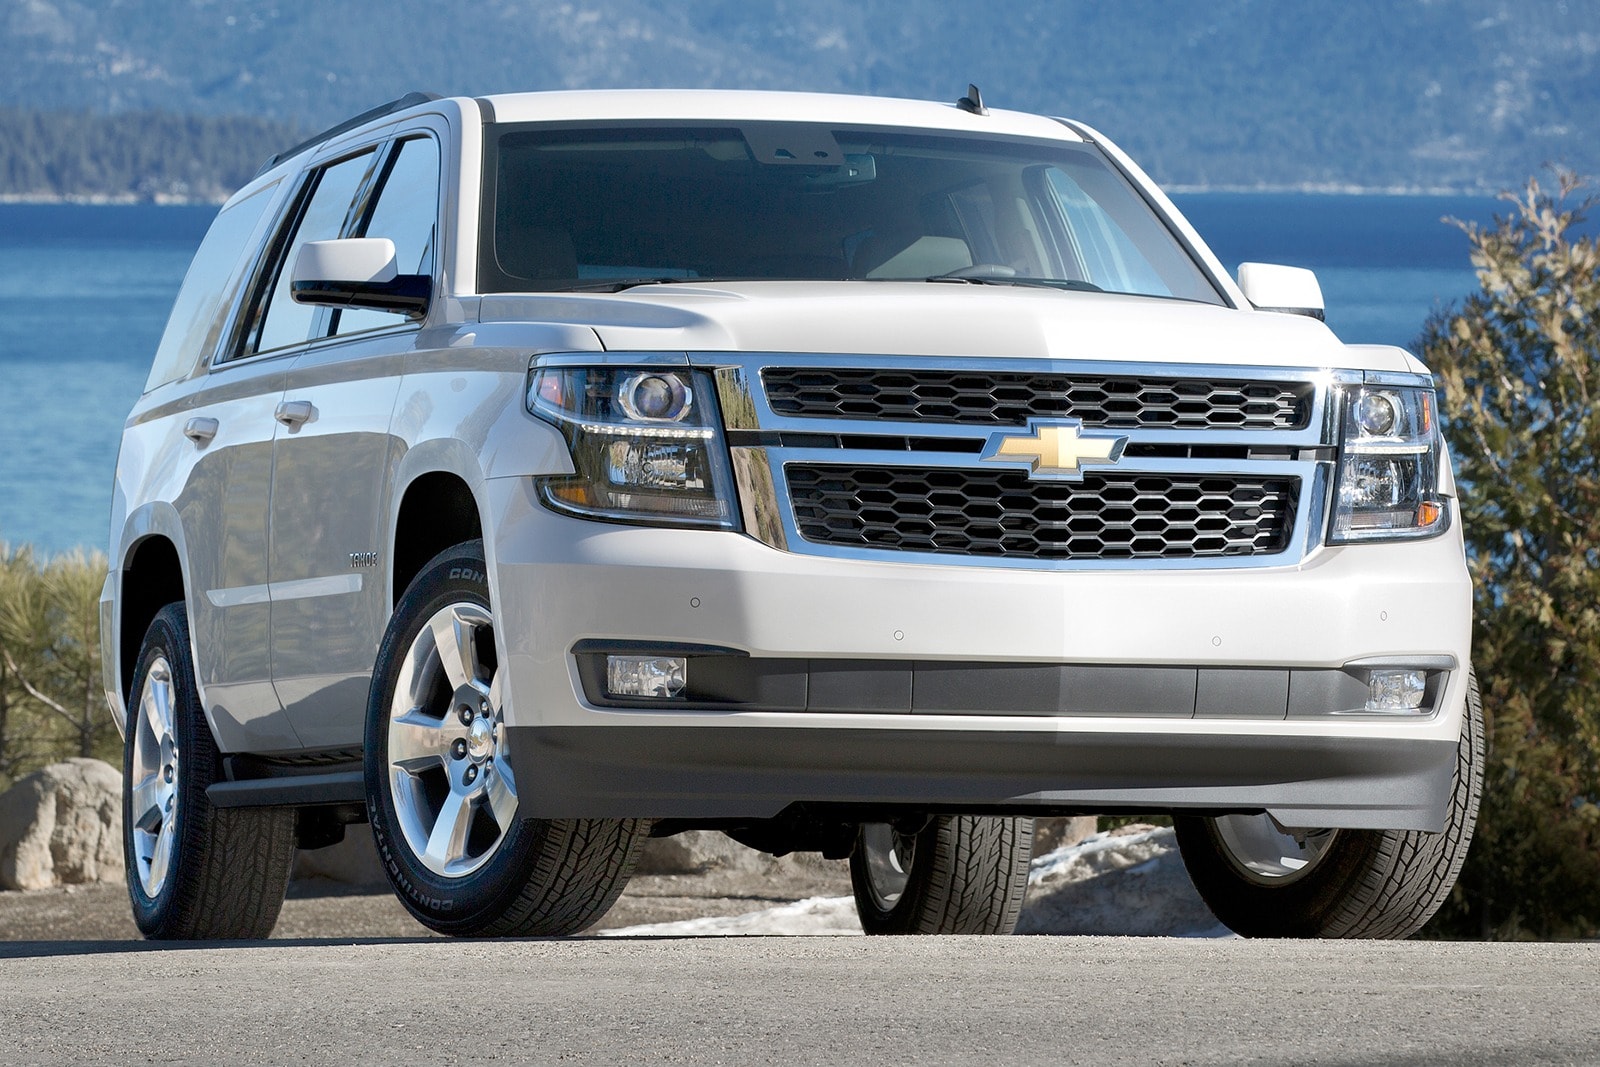 2016 Chevy Tahoe Review & Ratings | Edmunds